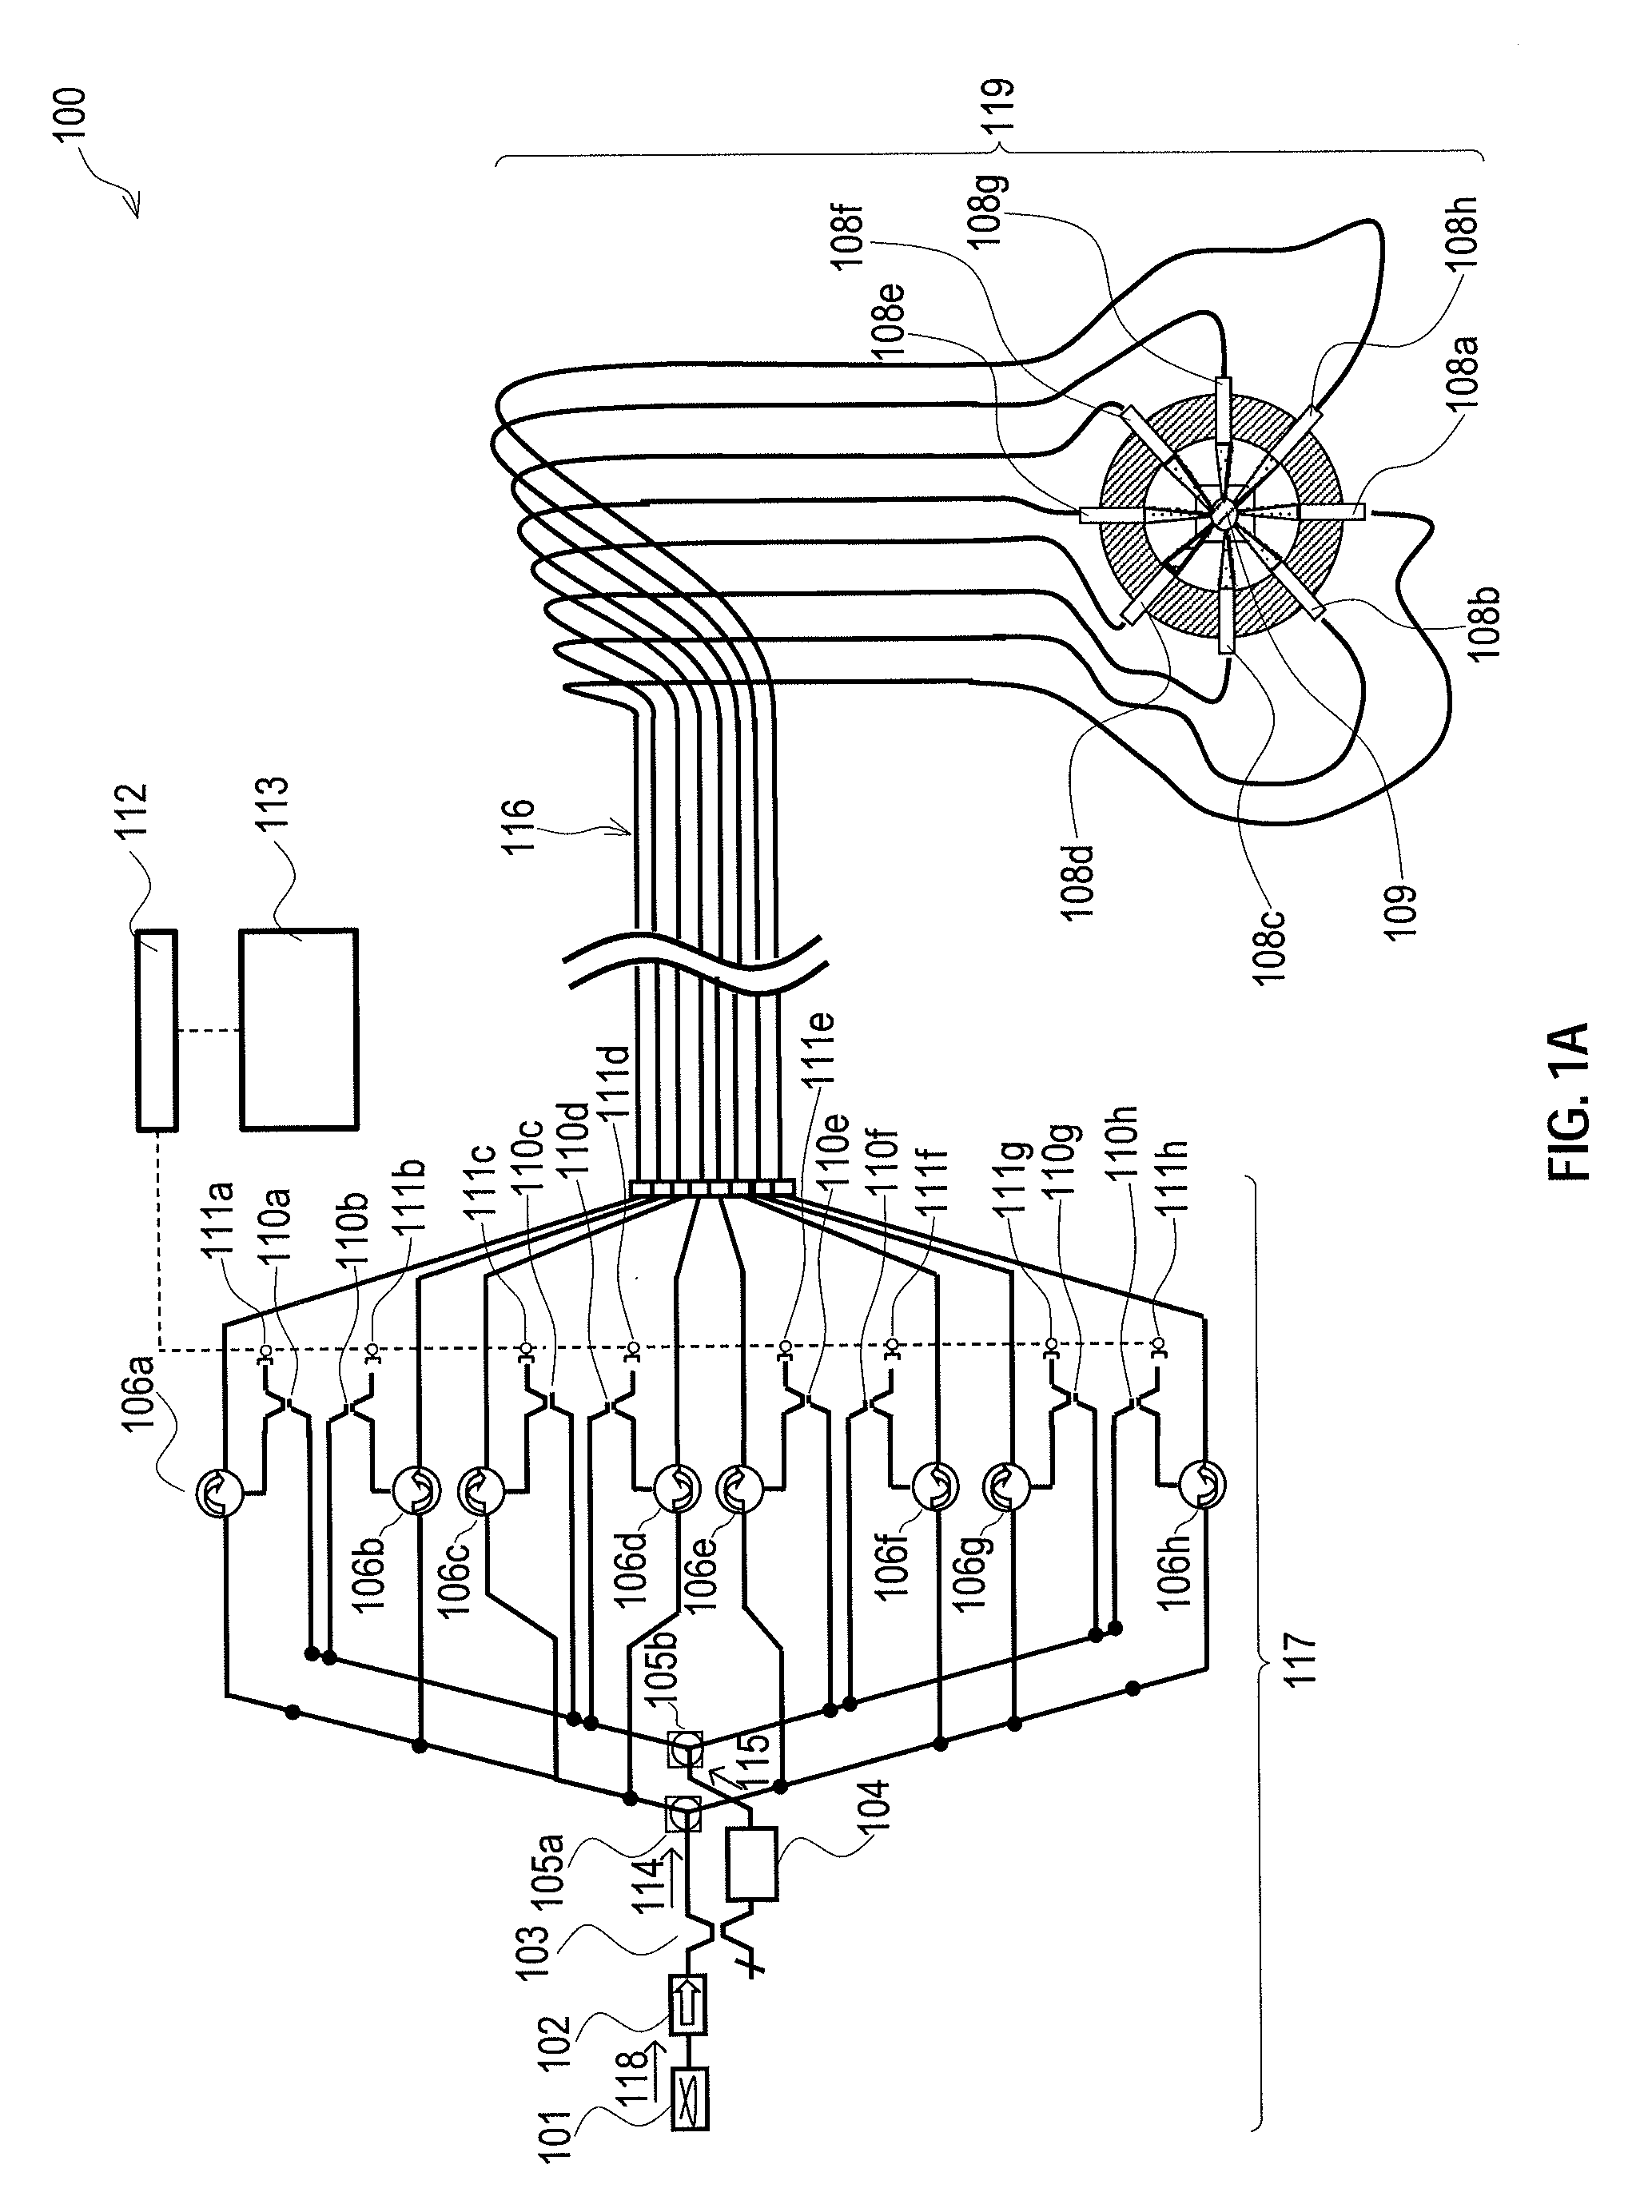 Method and system for conformal imaging vibrometry